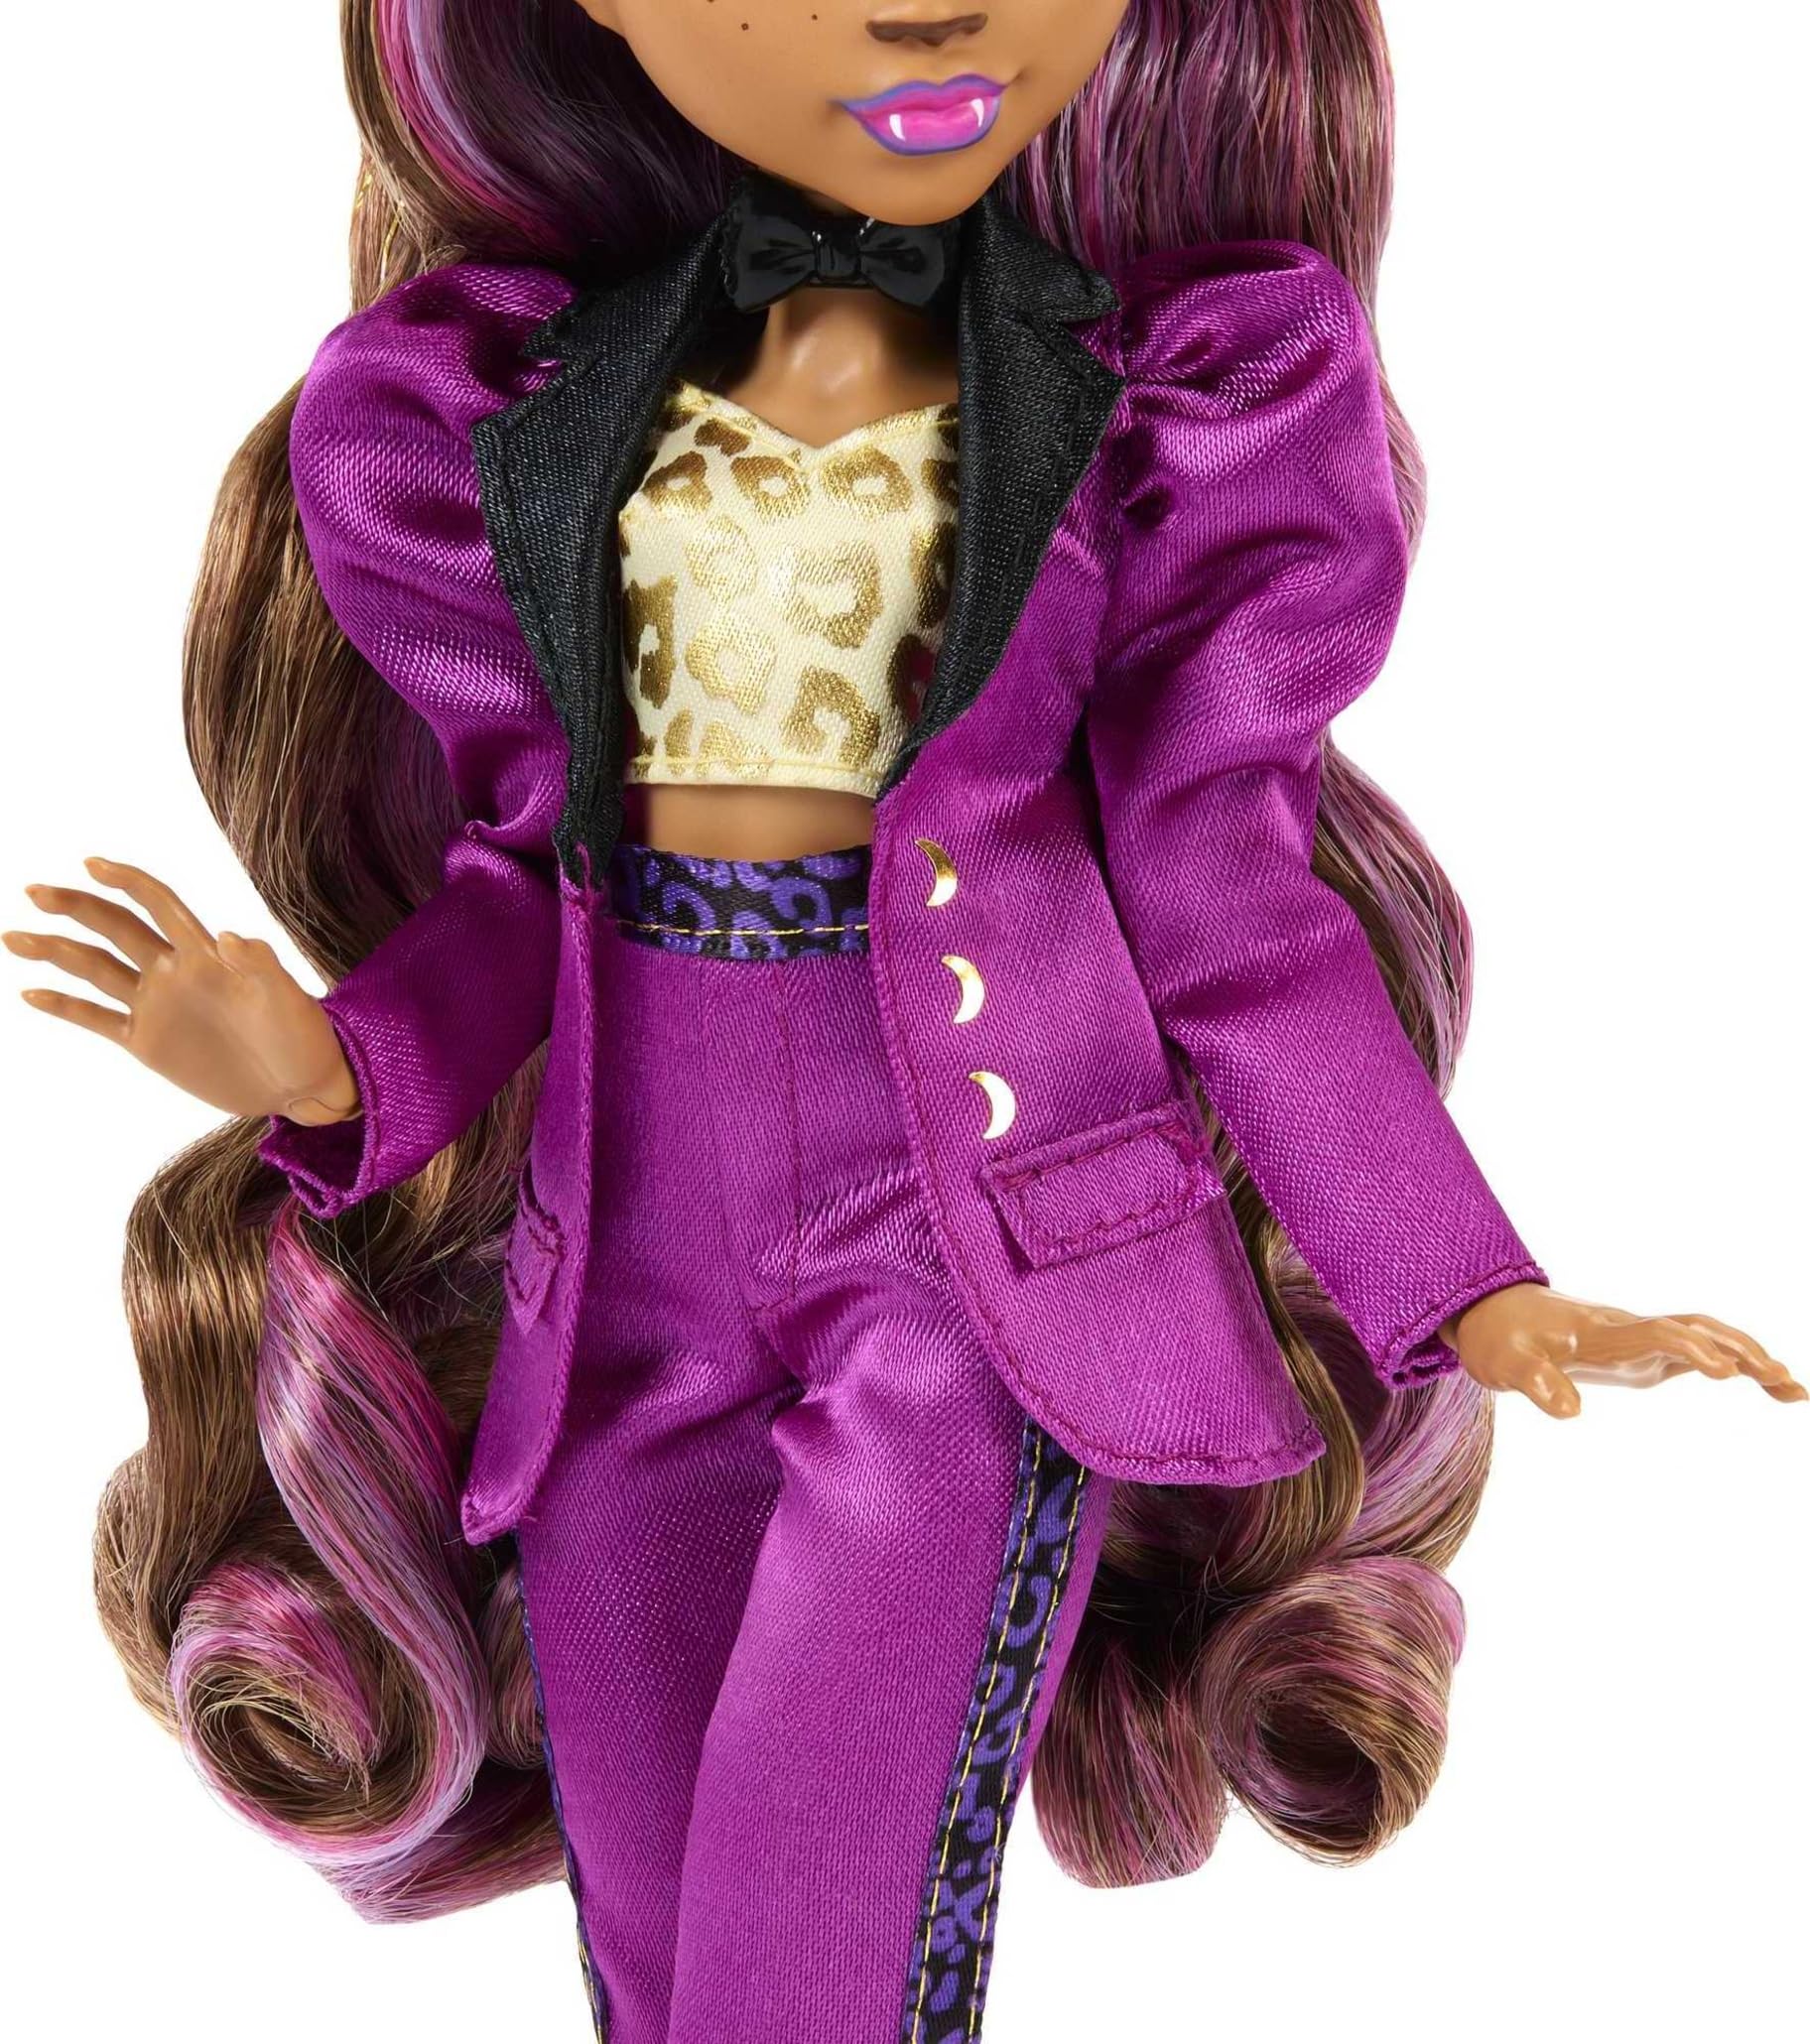 Monster High Clawdeen Wolf Doll in Monster Ball Party Fashion with Themed Accessories Like Balloons